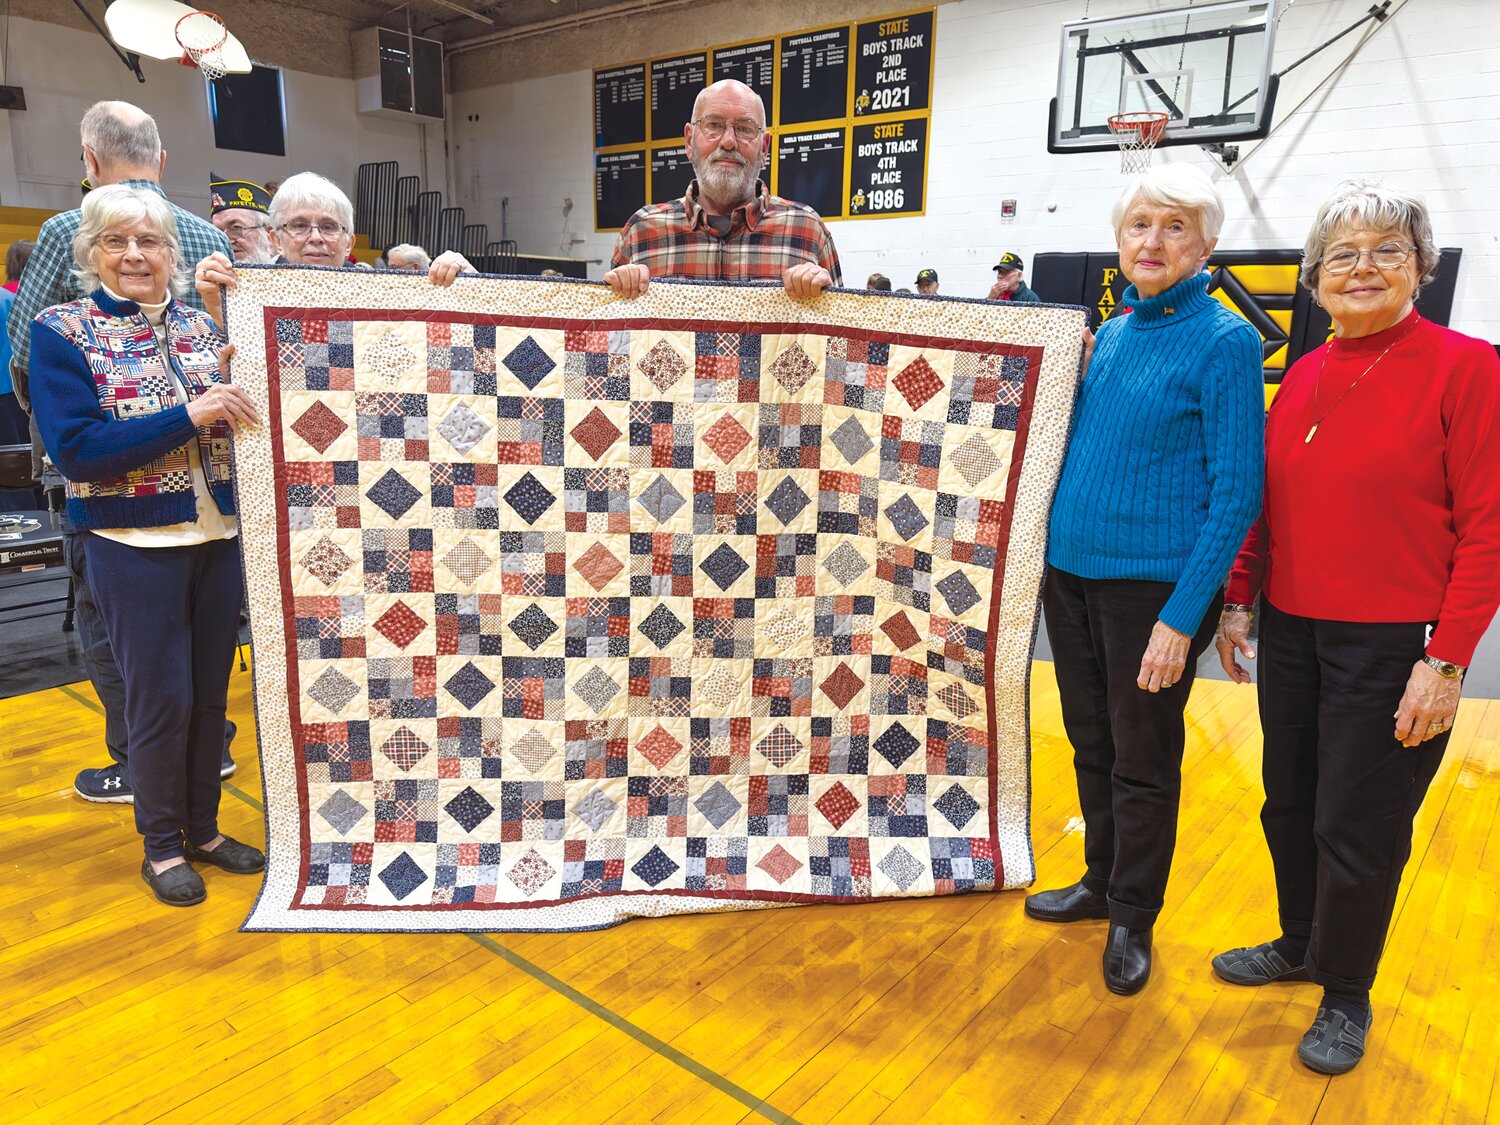 Veteran Kavin Owings received the Quilt of Valor Friday from the Peacemakers Quilters. Left to right: Connie Shay, Linda Lembke, Owings, Dorothy Ayers, and Jill Rohr. Not pictured: quilter Julie Menees.